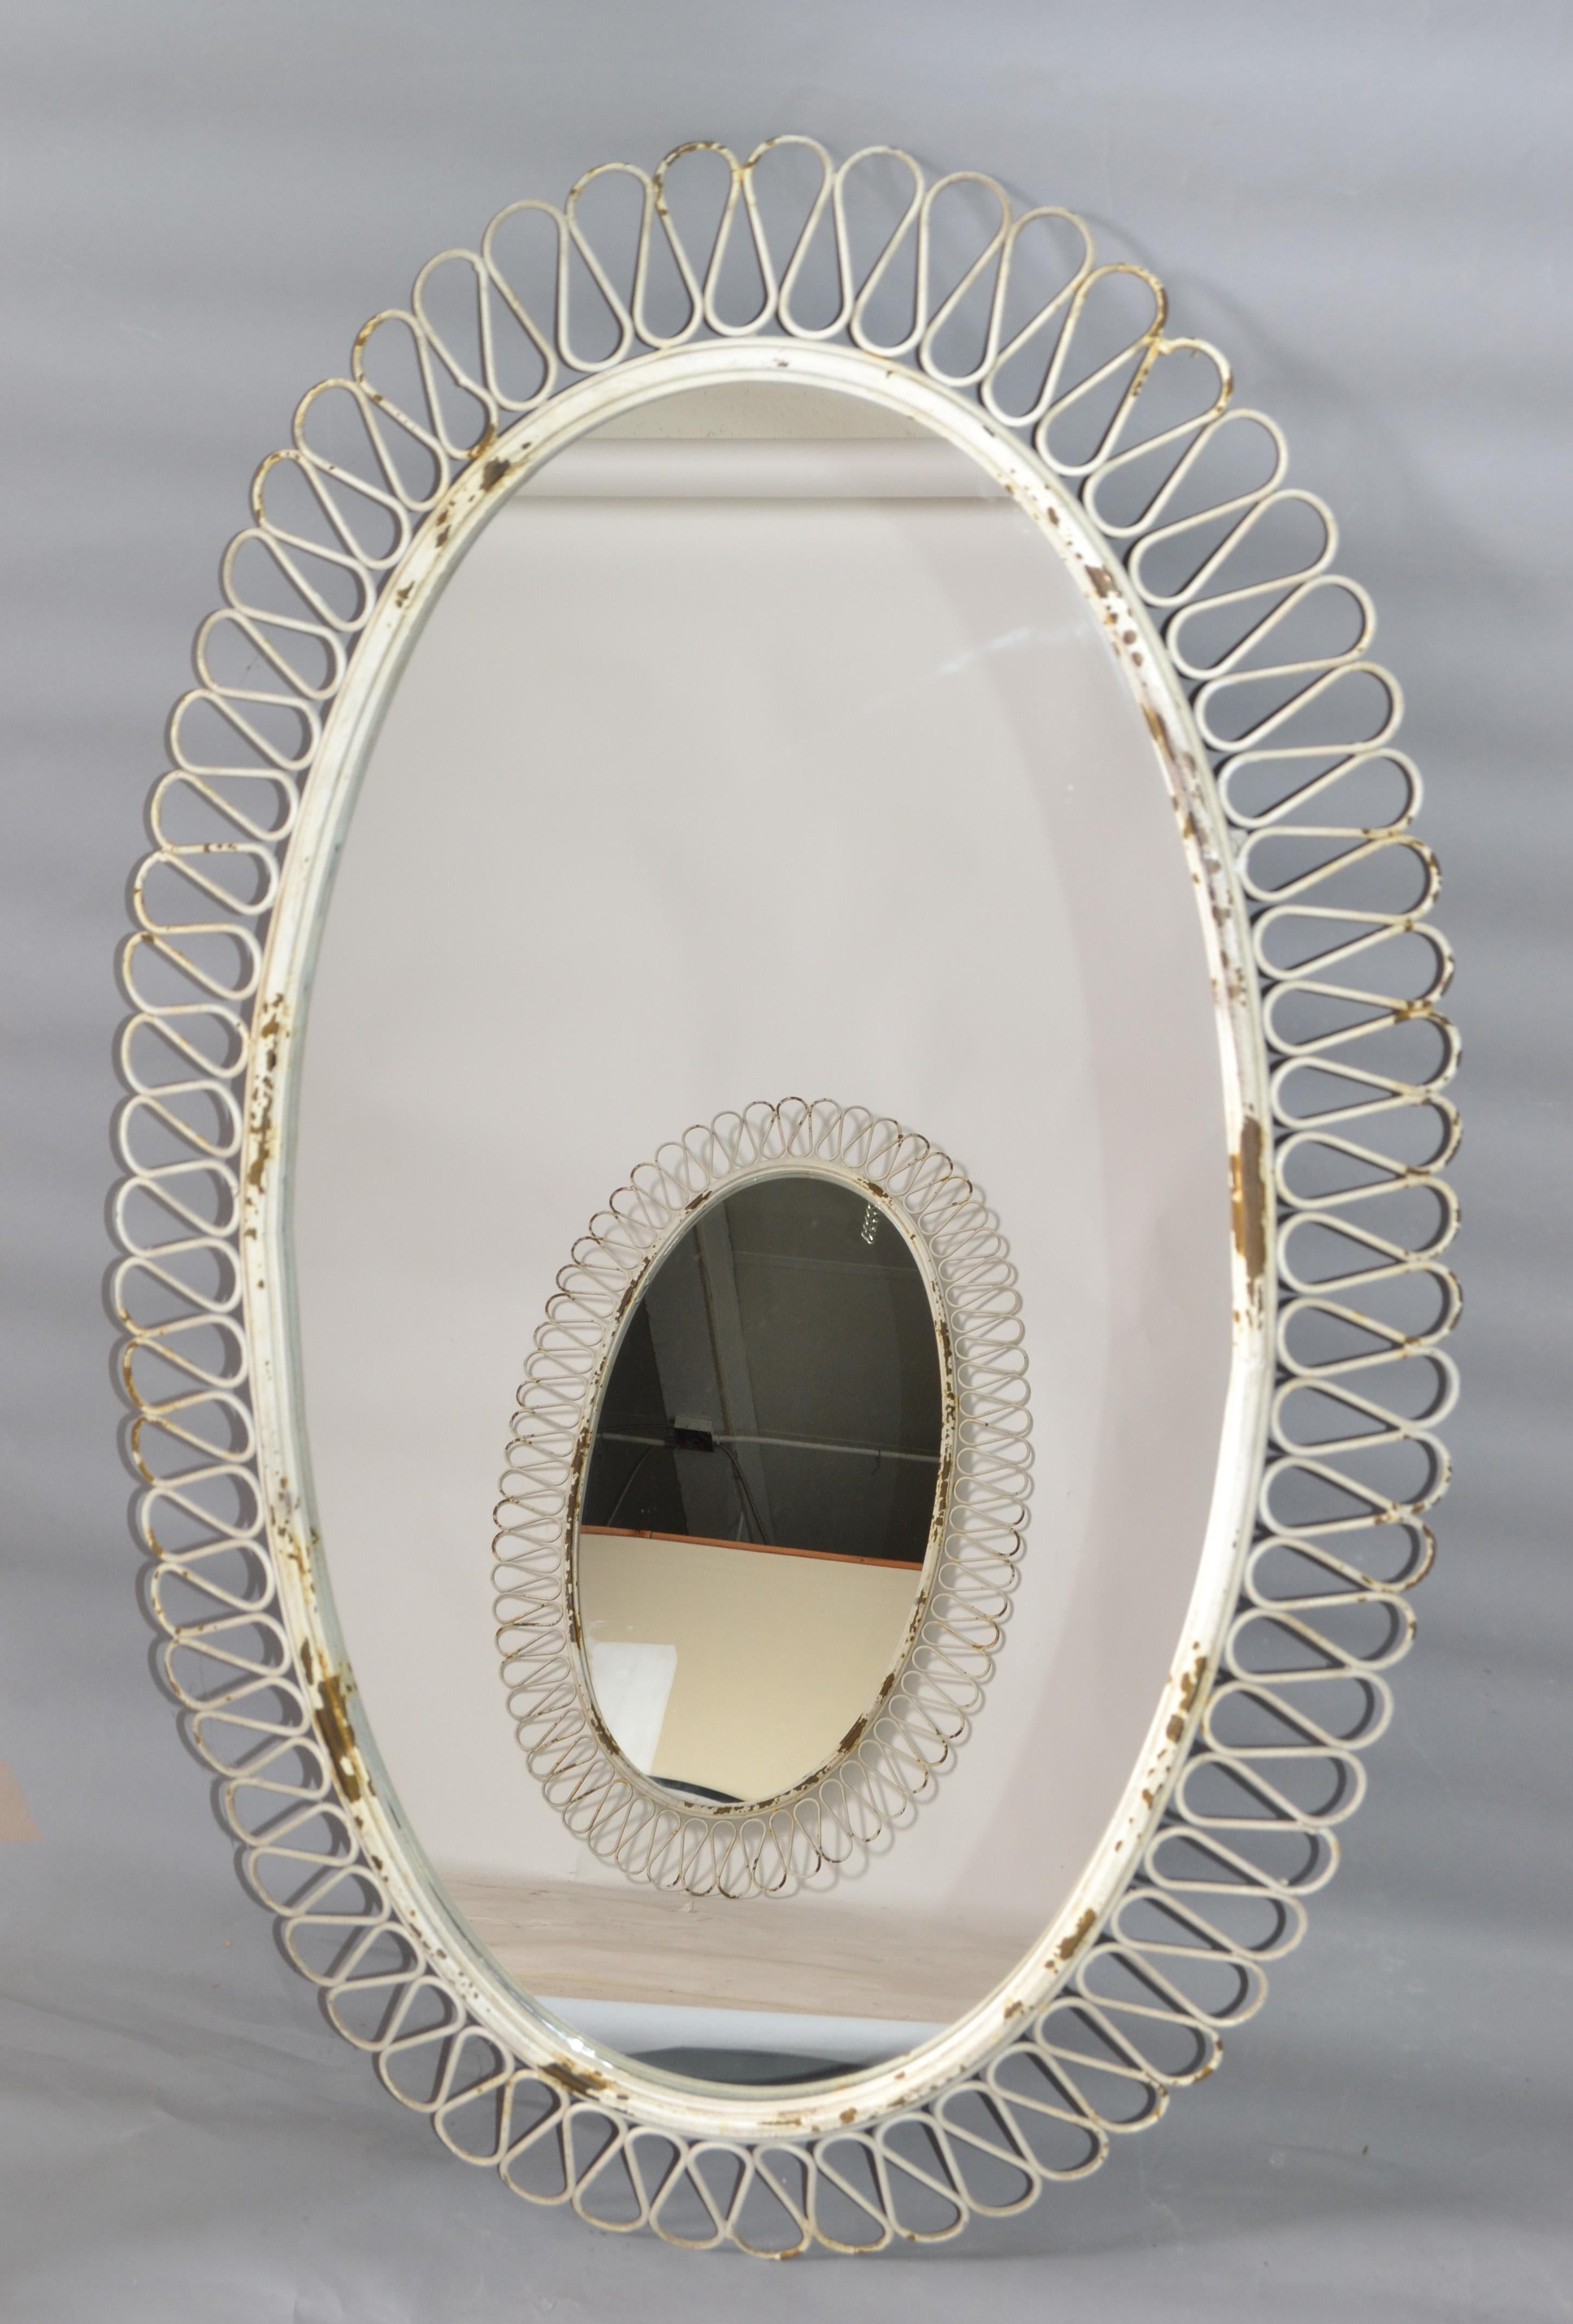 Pair of French Oval Wrought Iron Wall Mirror Antique White distressed Look, 1950 1